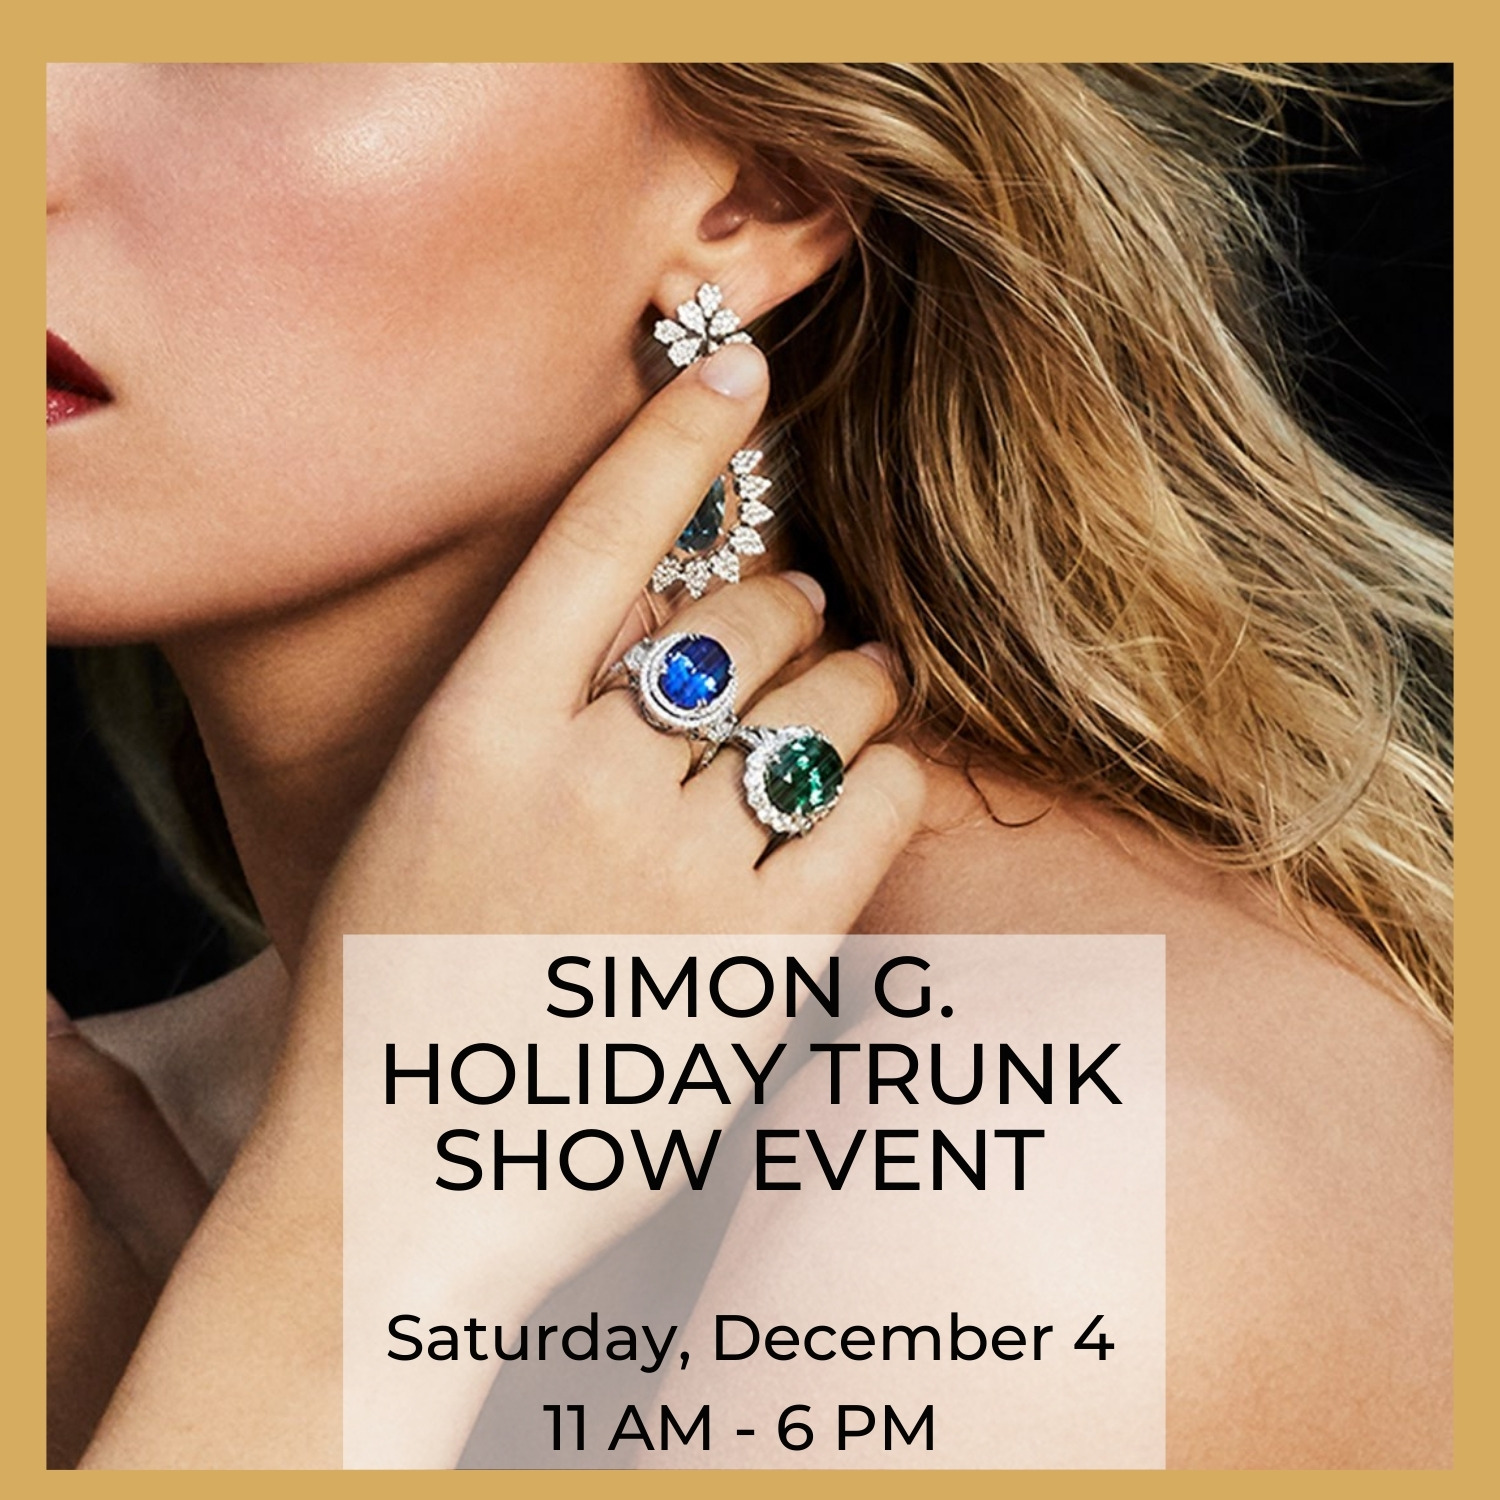 Simon G. Holiday Trunk Show Event